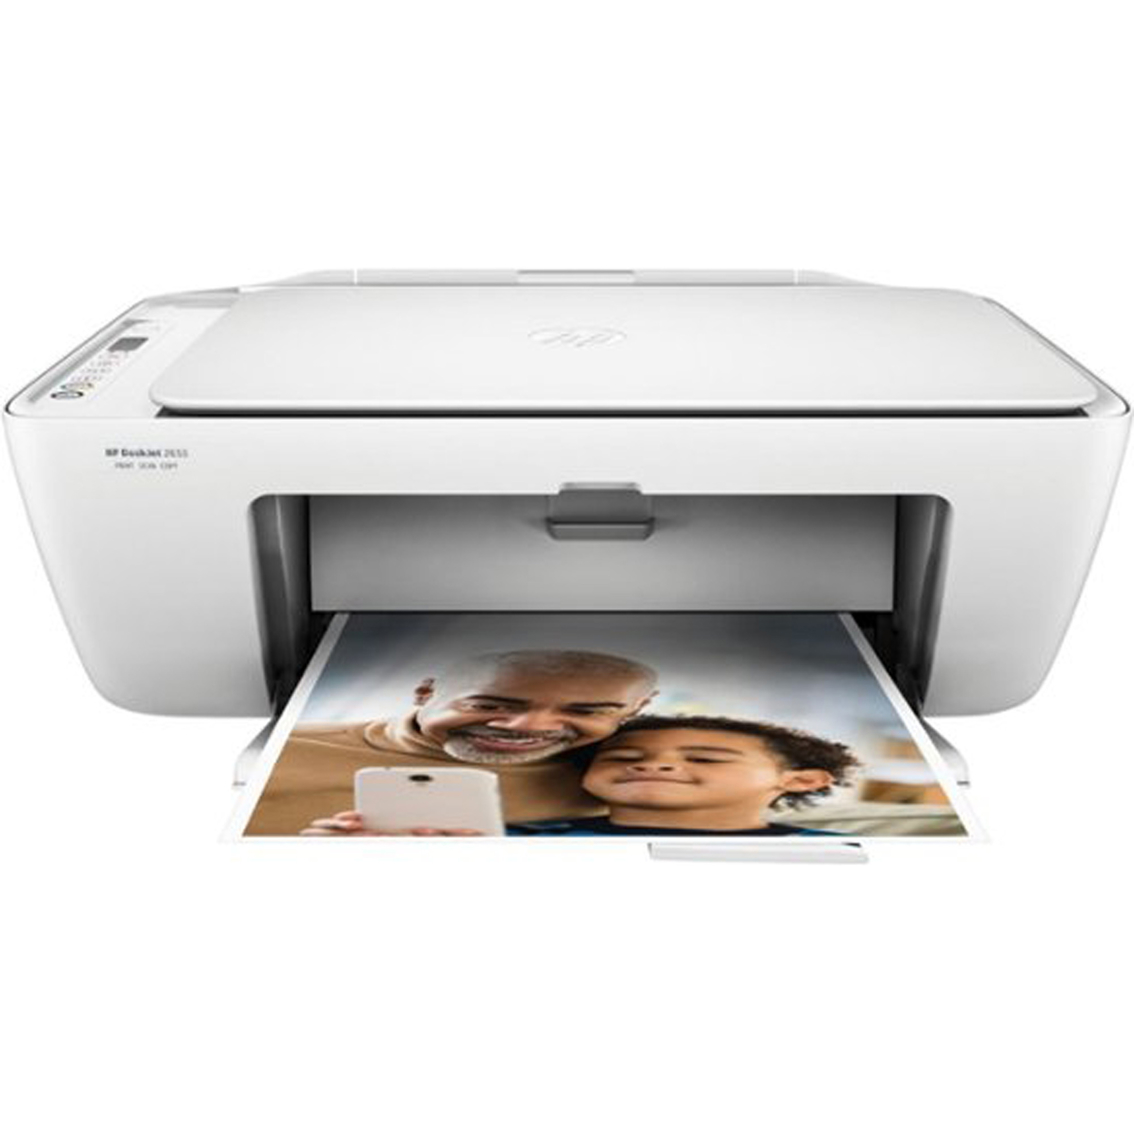 Hp Deskjet 2755 All In One Printer All In One Printers Electronics Shop The Exchange